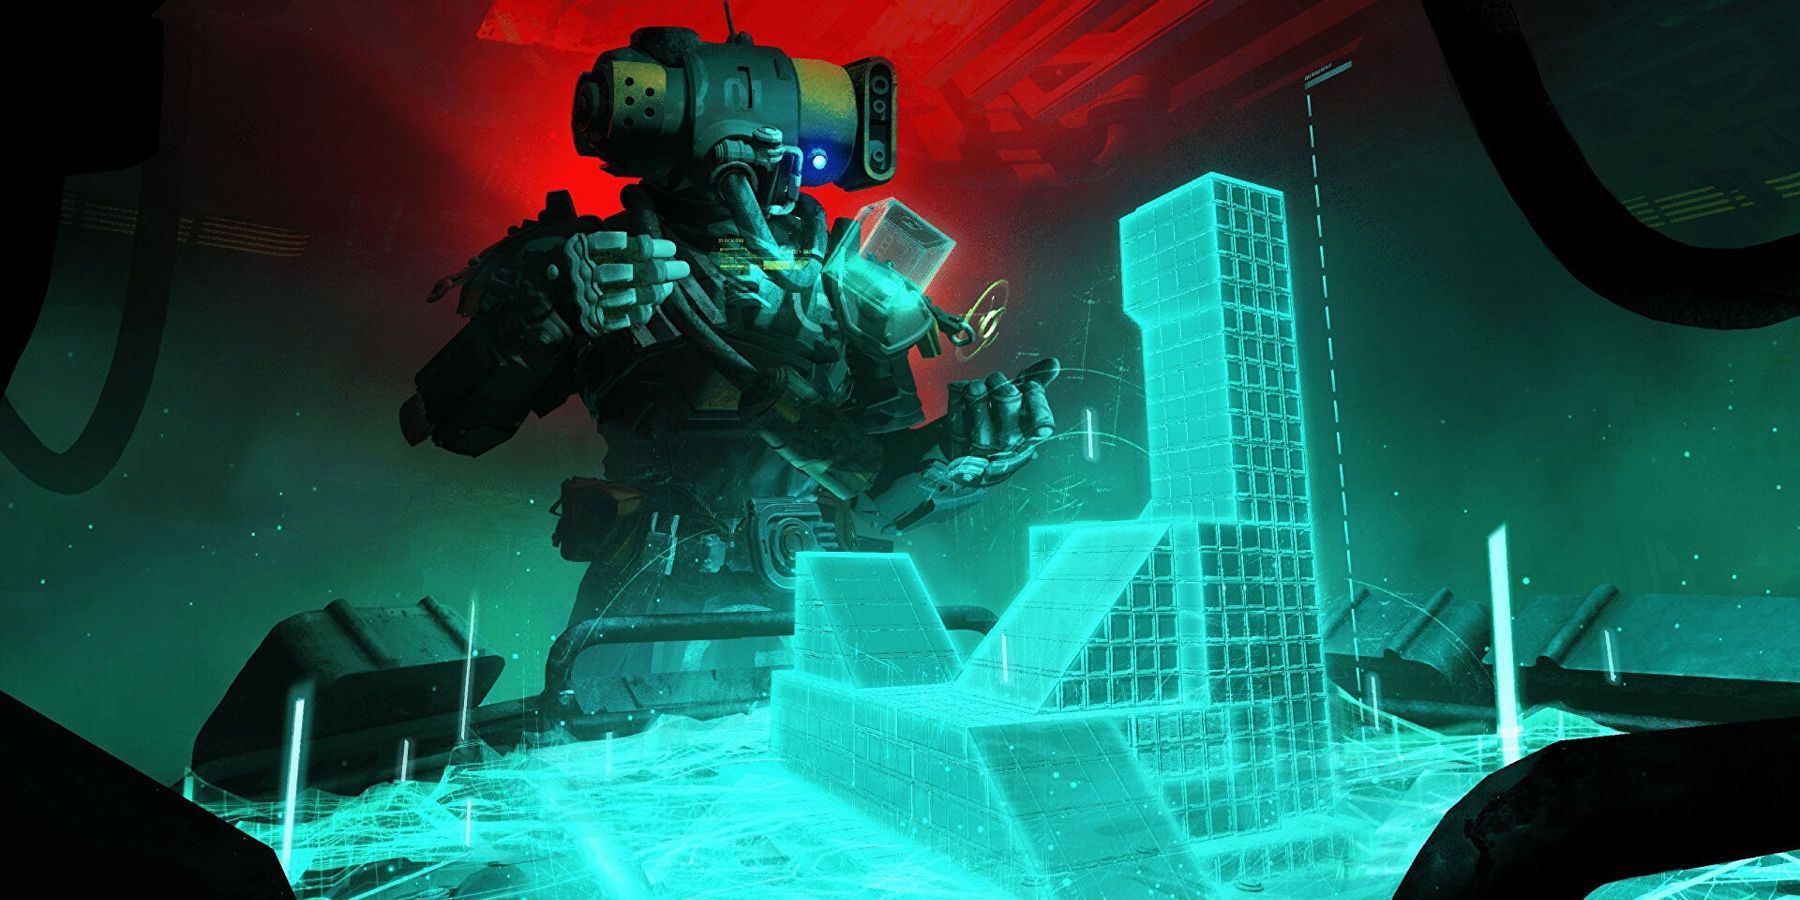 Image of a Meet Your Maker character designing a level in-game, standing in front of a holographic projection of a structure being built.